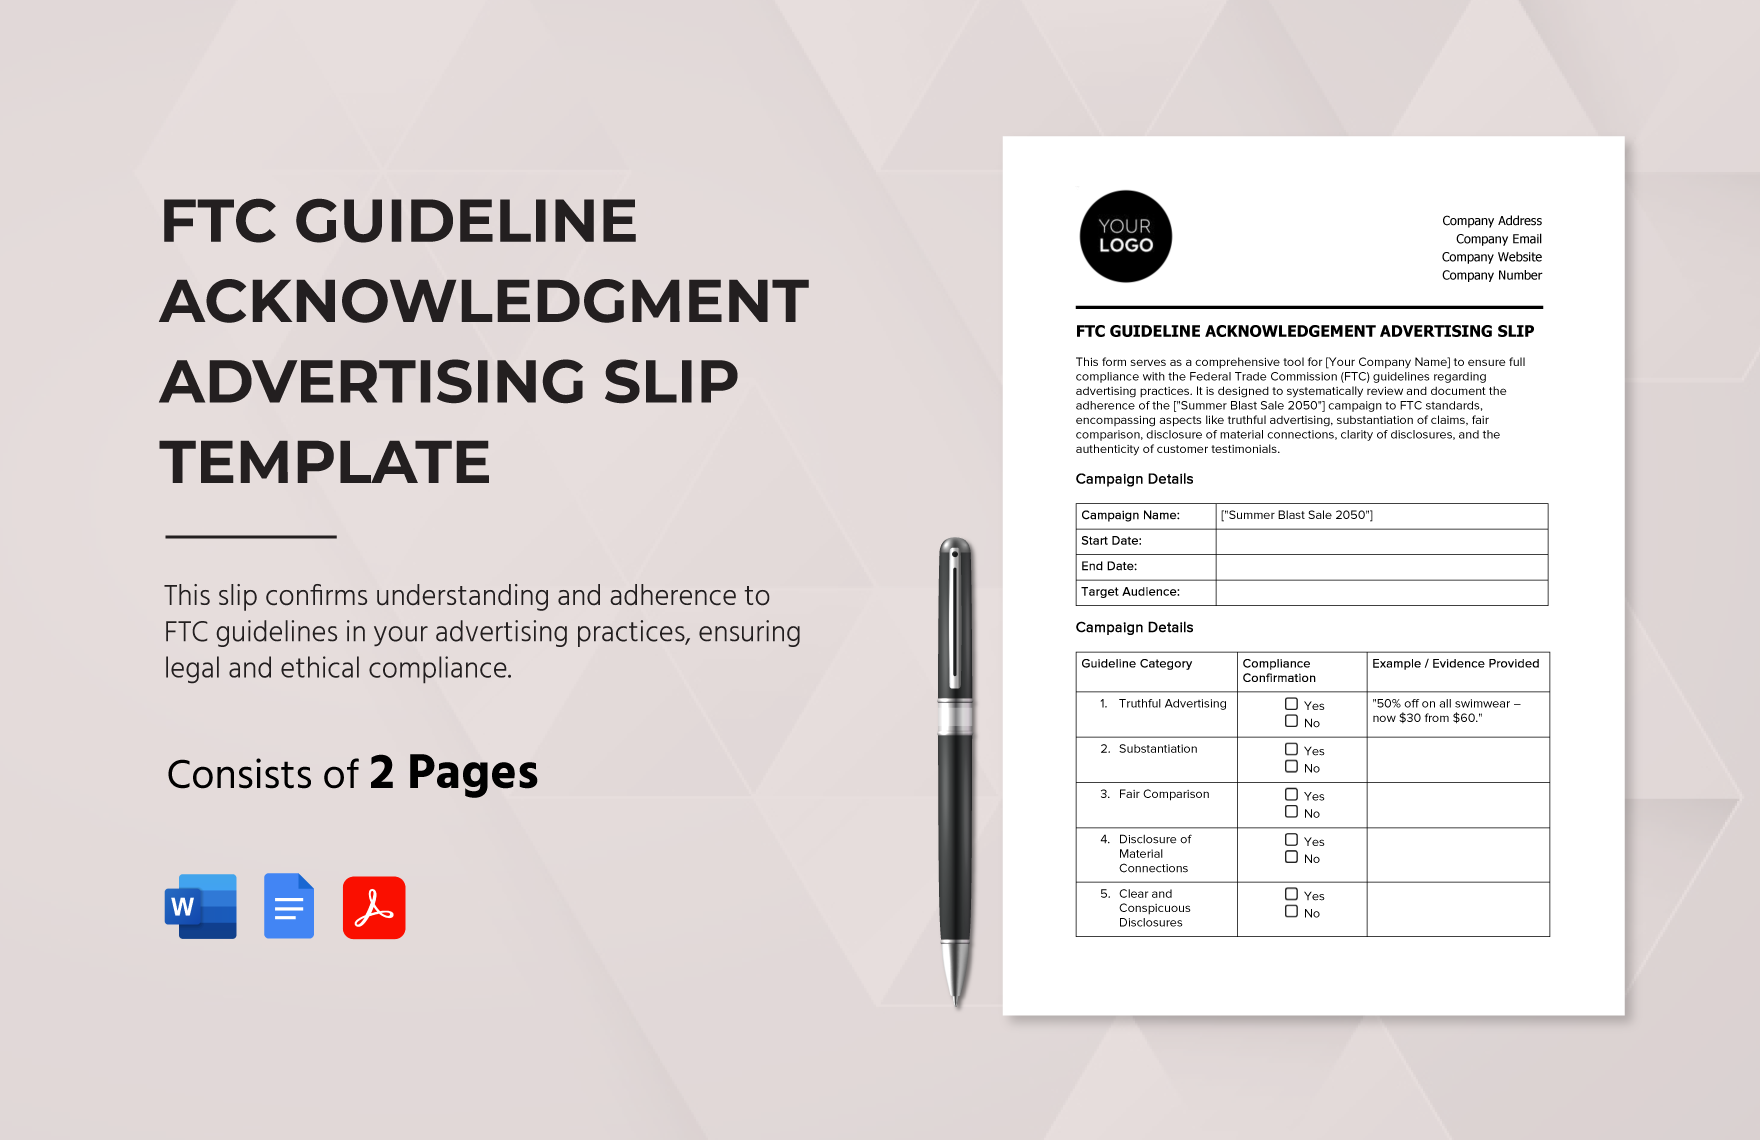 FTC Guideline Acknowledgment Advertising Slip Template